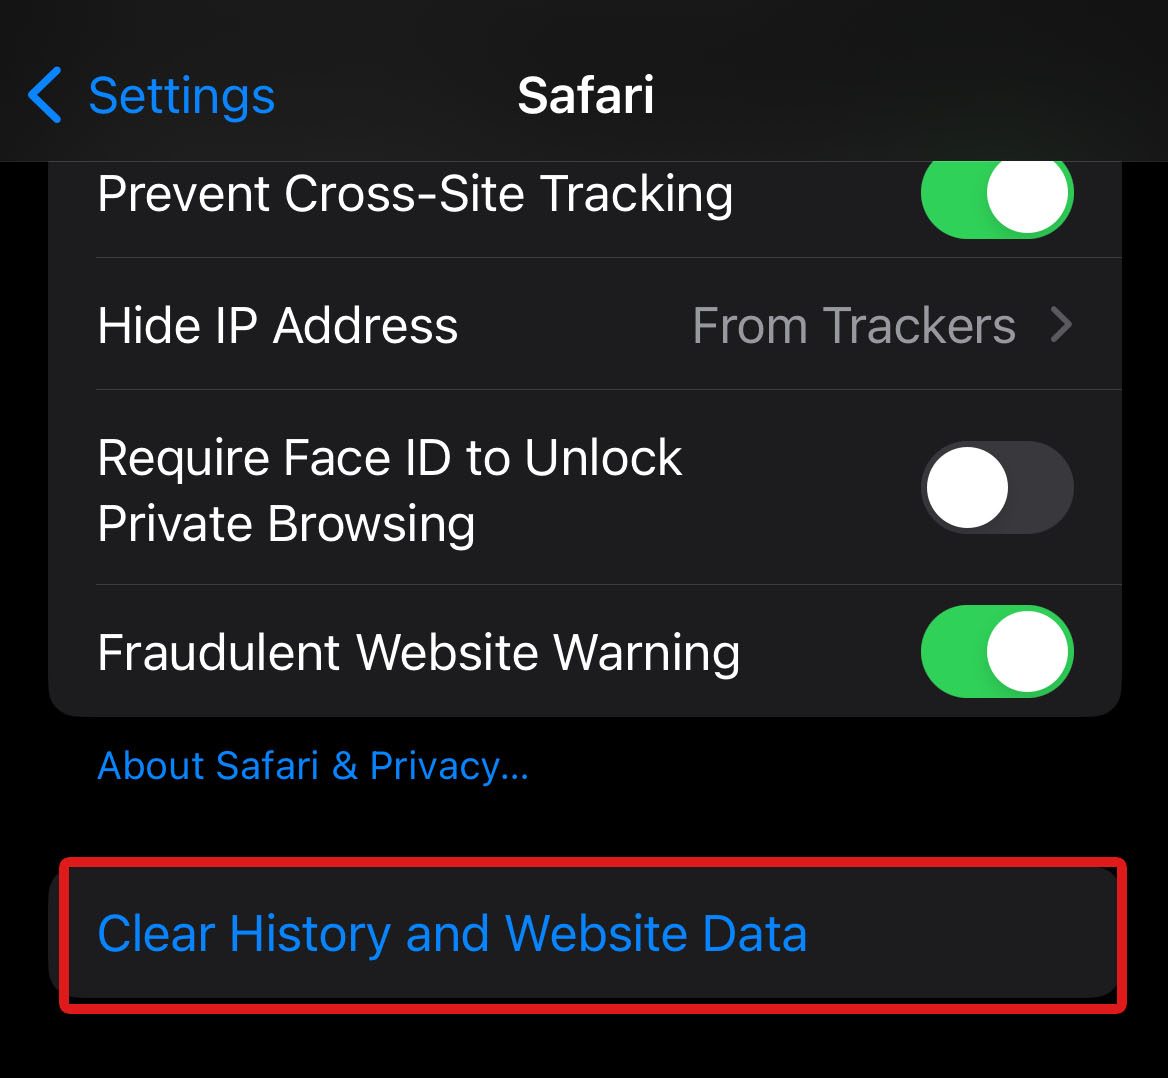 clear history and website data